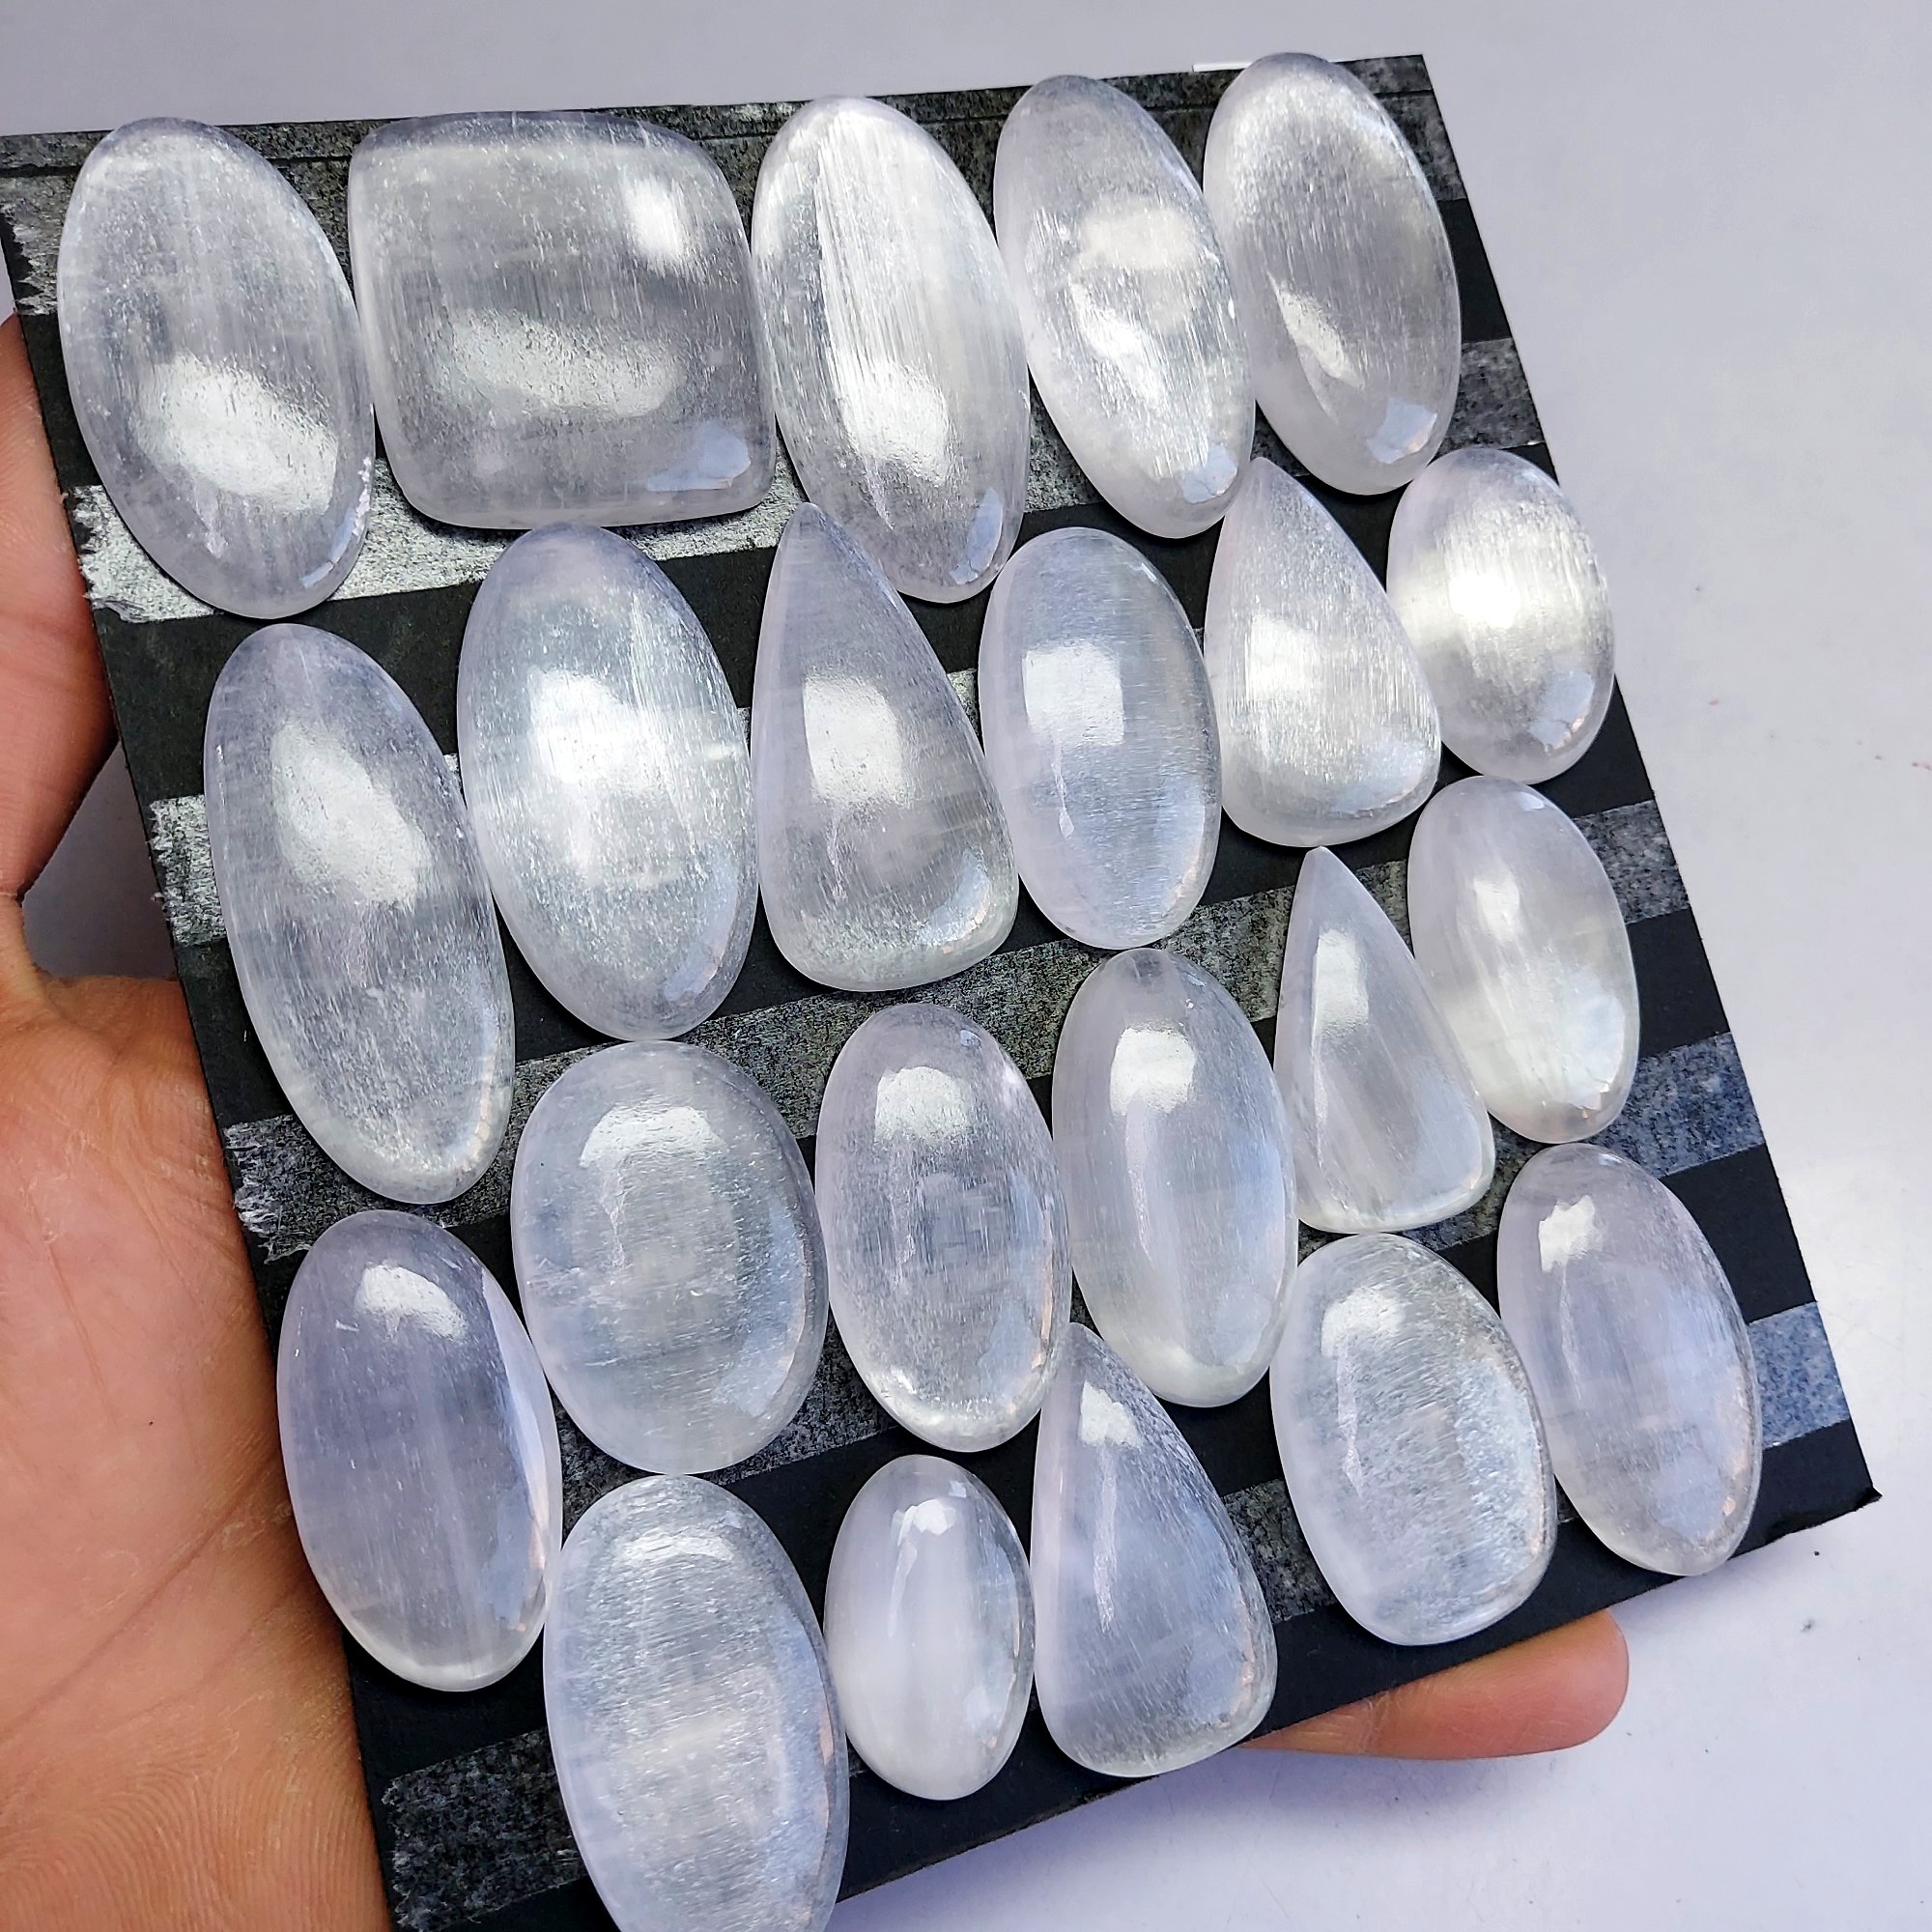 22pcs 1250 Cts Natural White Selenite Loose Cabochon Lot  Gemstone For Jewelry Wholesale Lot Size 38x34 27x16mm